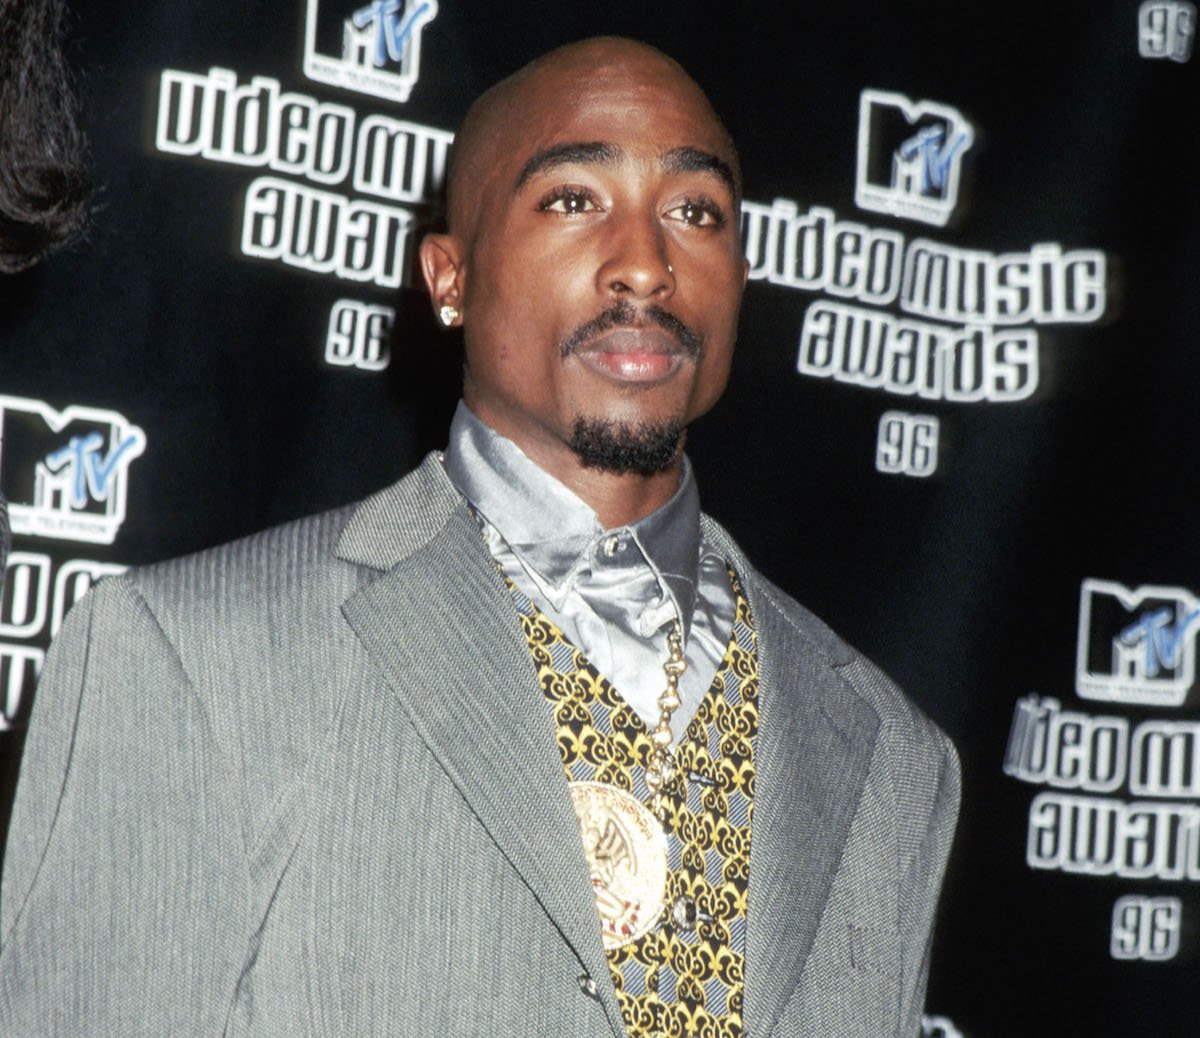 Tupac Shakur’s Museum is Facing Legal Trouble